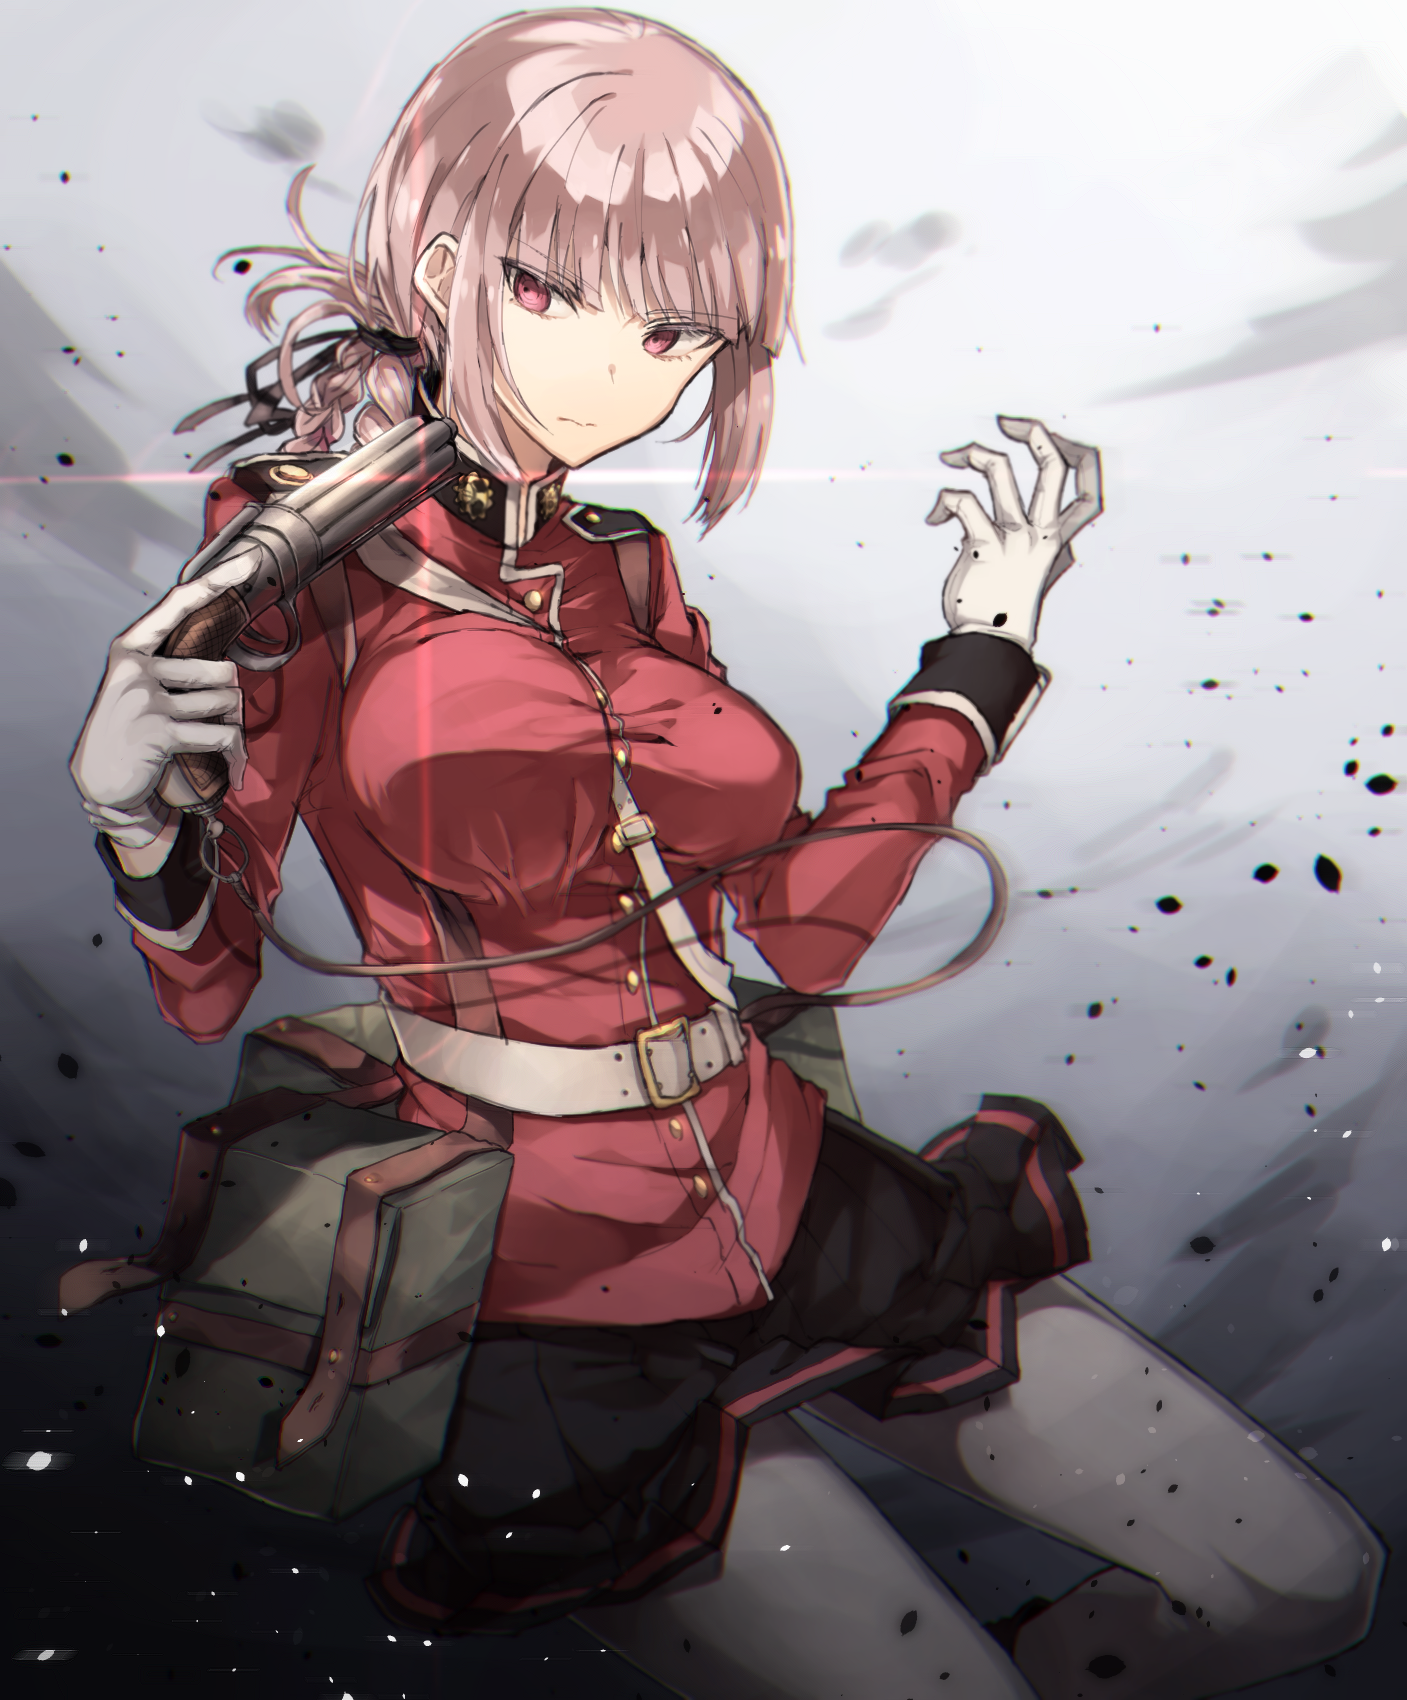 Anime 1407x1700 anime anime girls Fate/Grand Order red eyes gun weapon skirt Florence Nightingale (Fate/Grand Order) Fate series